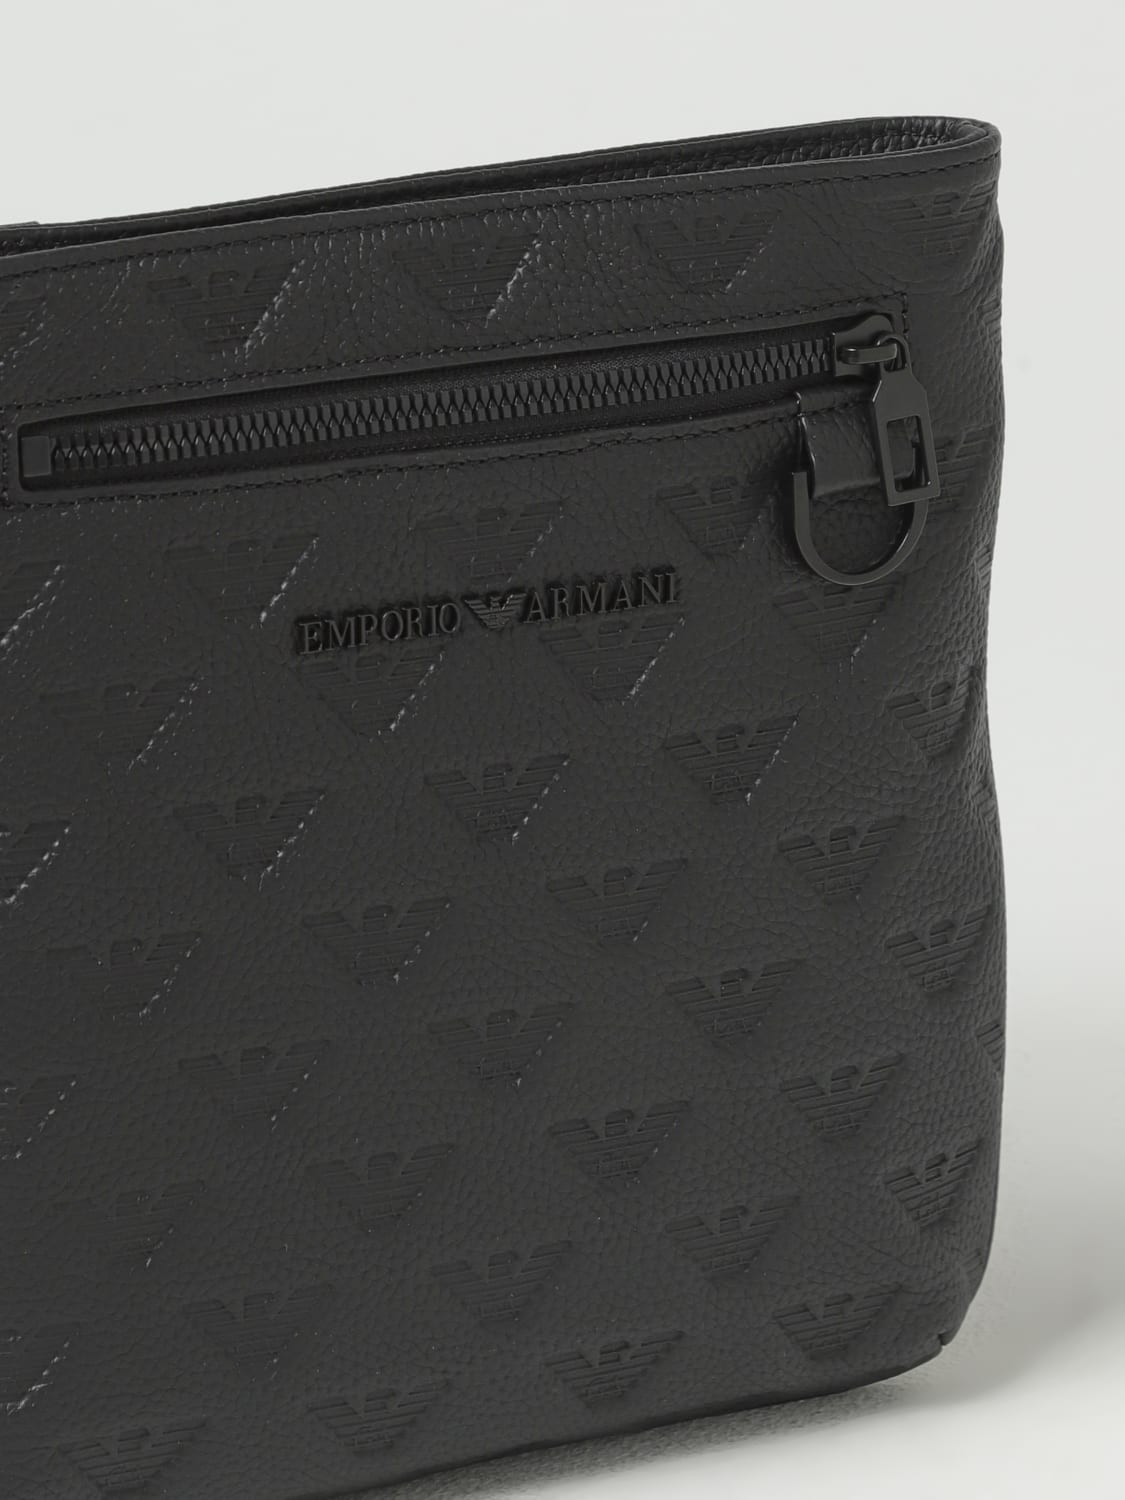 Leather Crossbody Bag With All-Over Embossed Eagle by Emporio